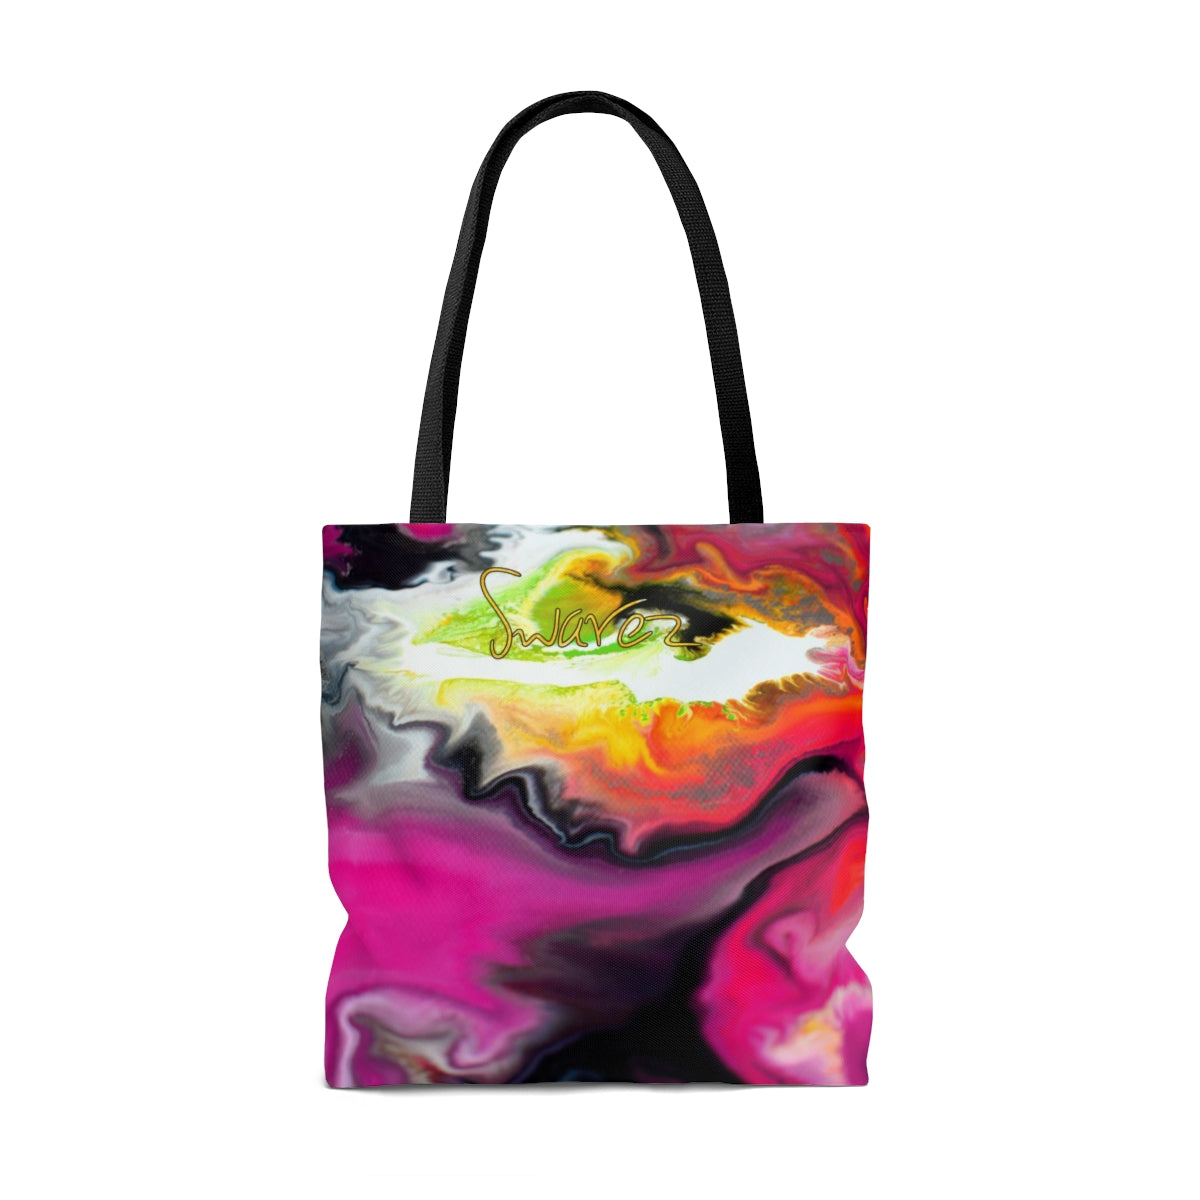 All Over Print Tote Bag - Pink and yellow design